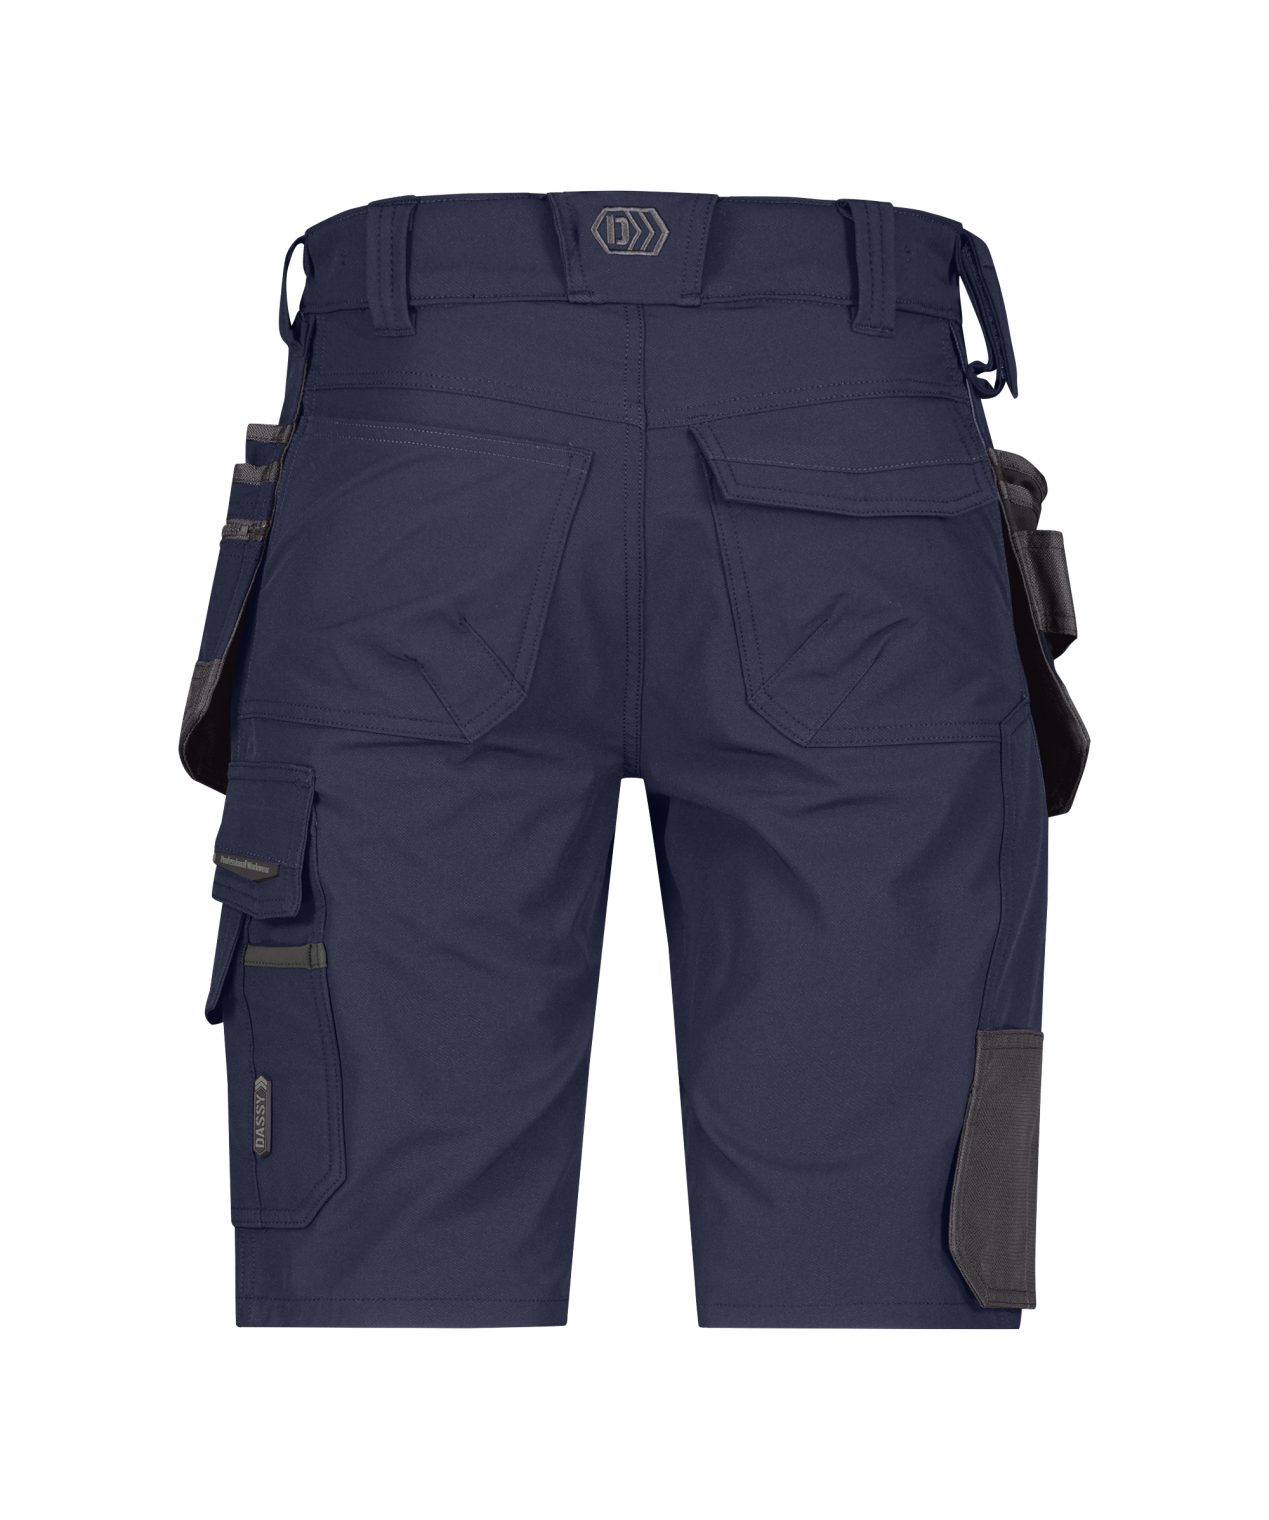 aurax stretch work shorts with holster pockets midnight blue anthracite grey back